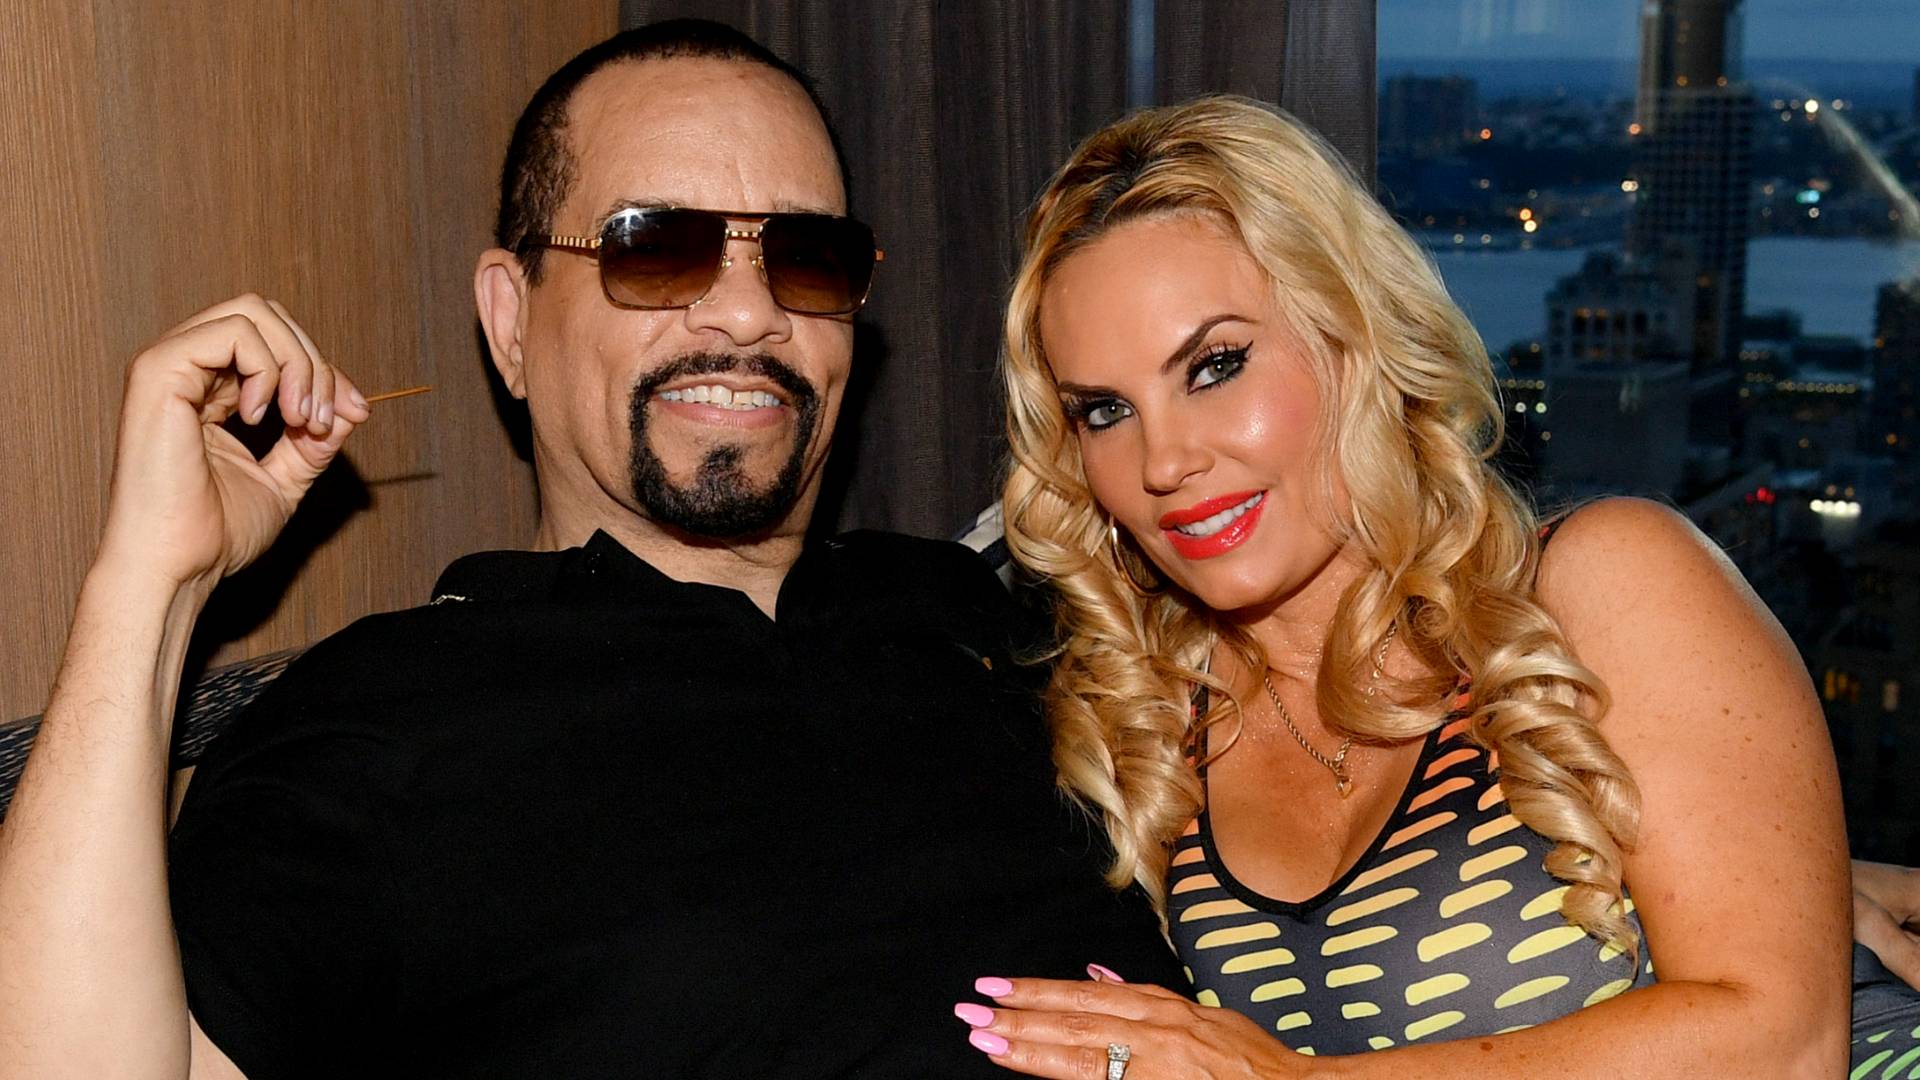 Ice-T And Coco Austin Throw Their Daughter Chanel An Over-The-Top  'SpongeBob' Themed Birthday Party!, News